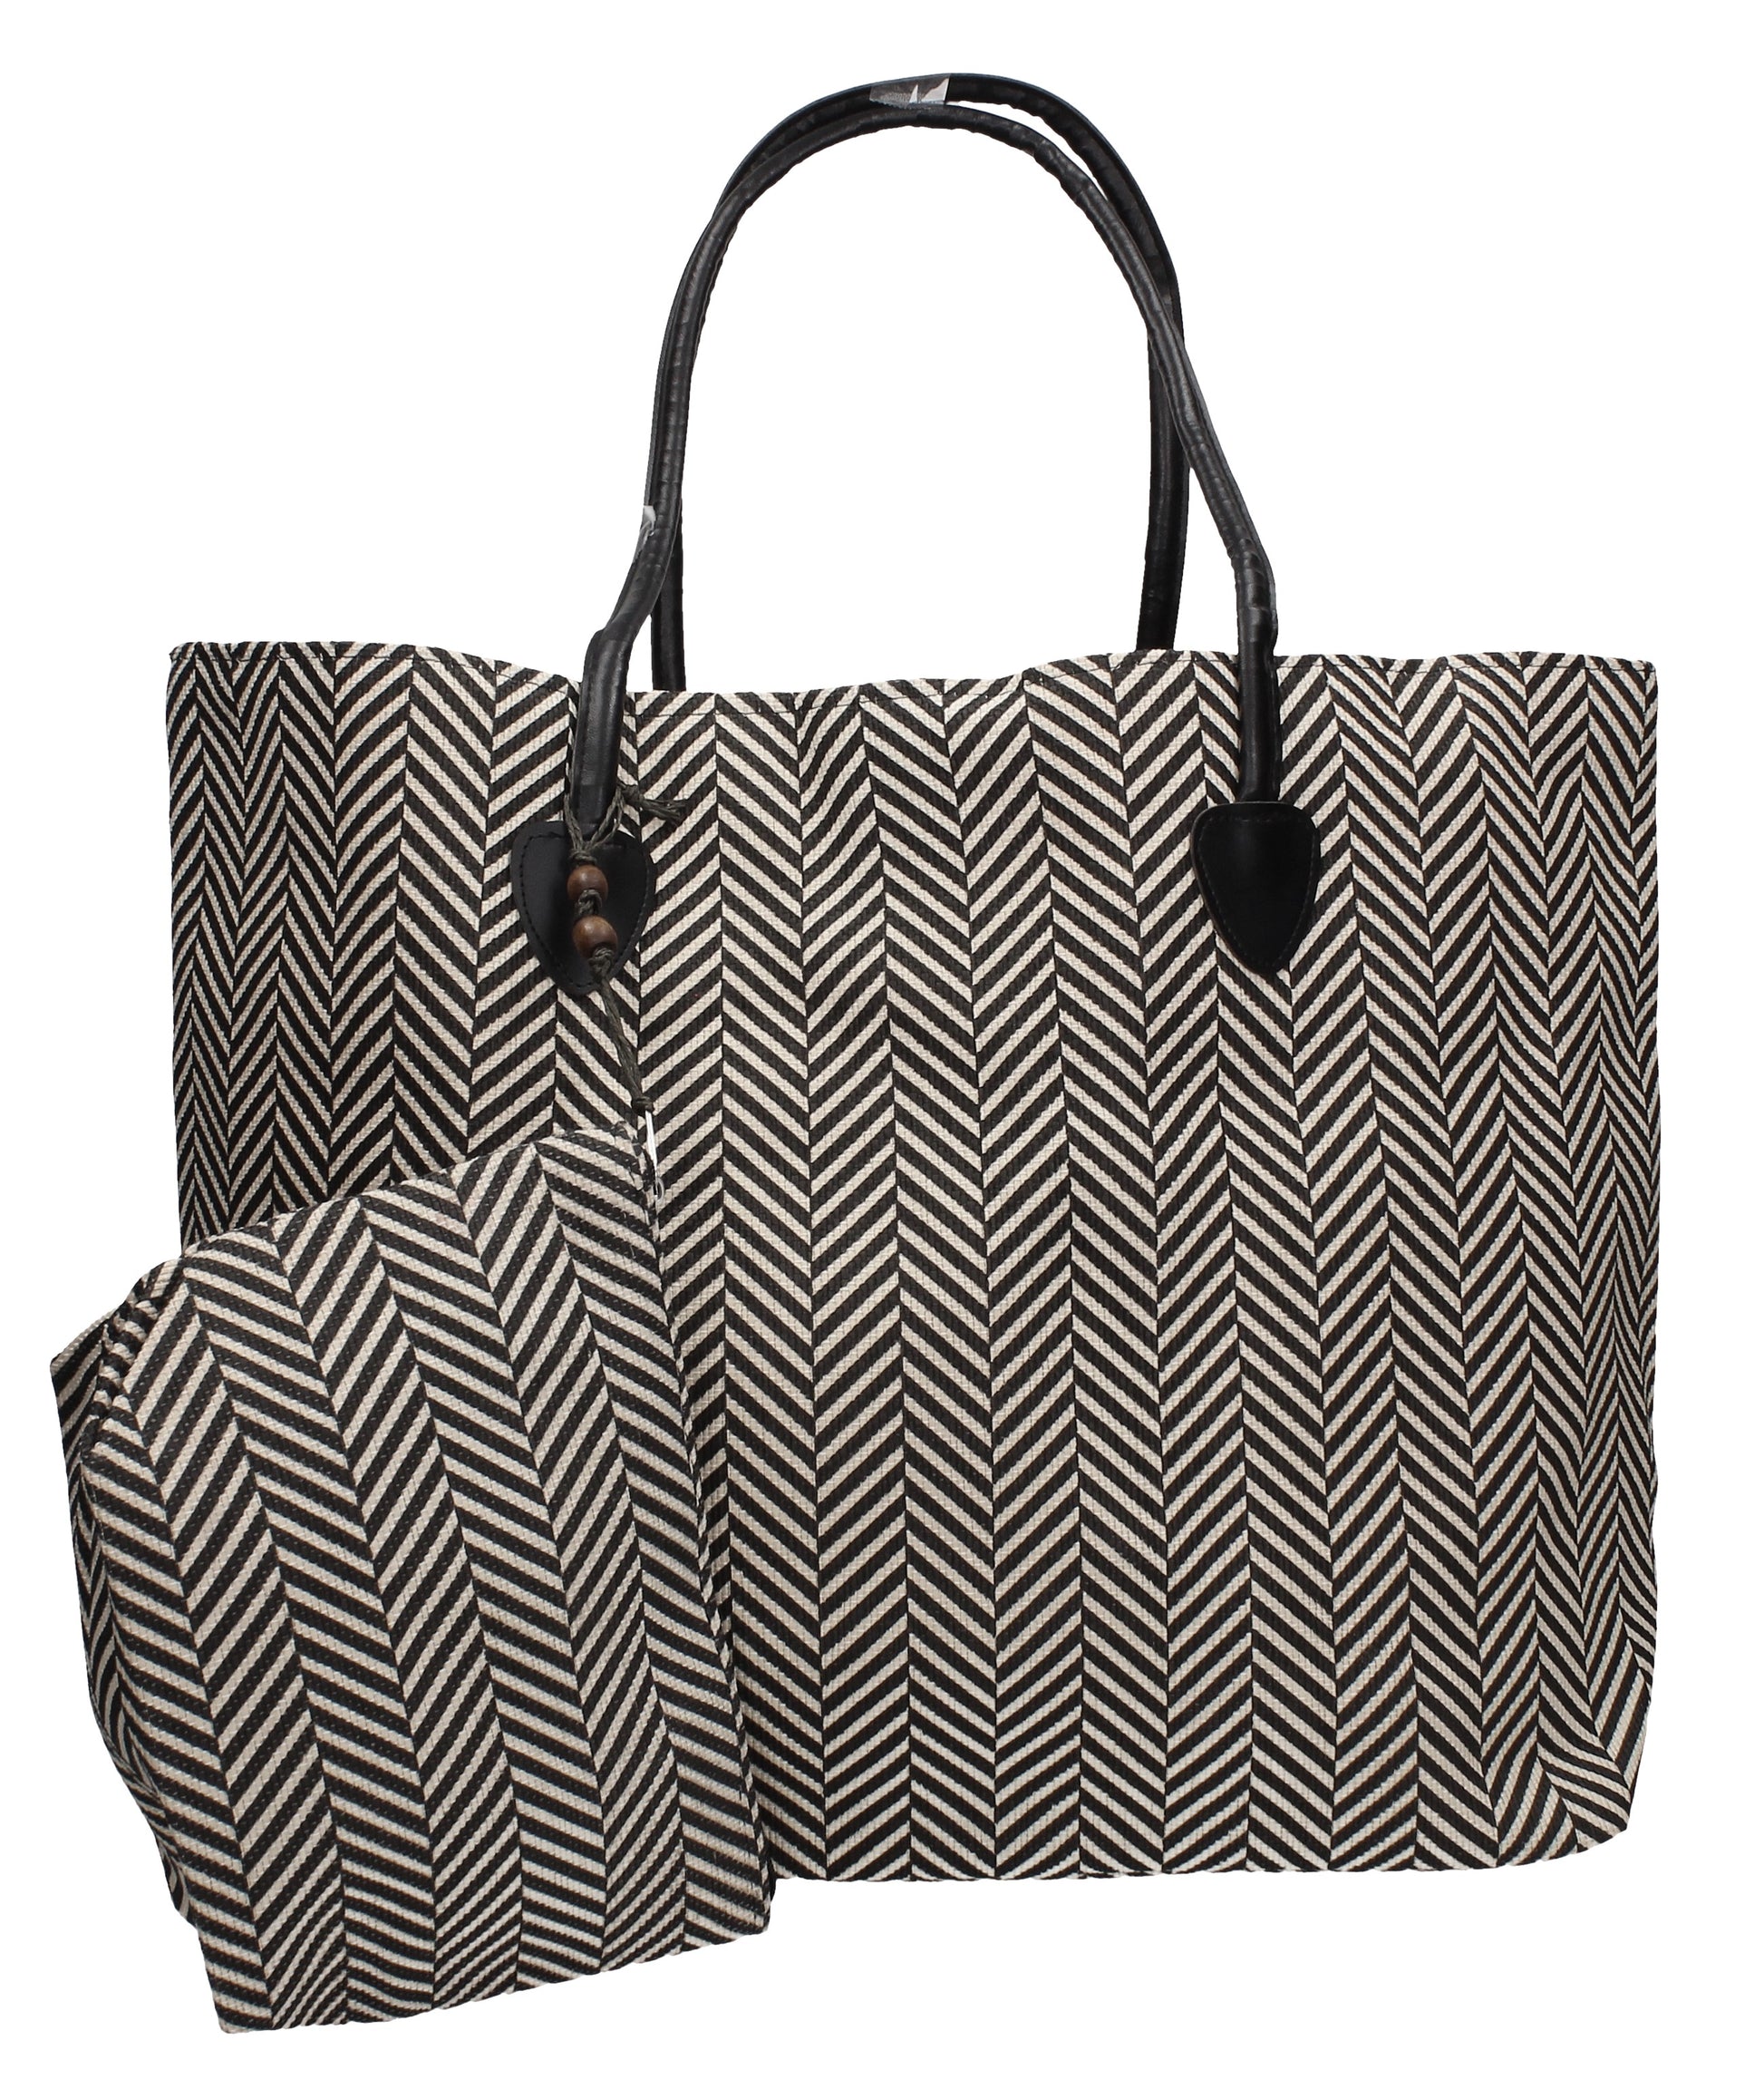 Swanky Swans Wave Print Beach Tote Bag Summer Handbag BlackPerfect for School, Weddings, Day out!